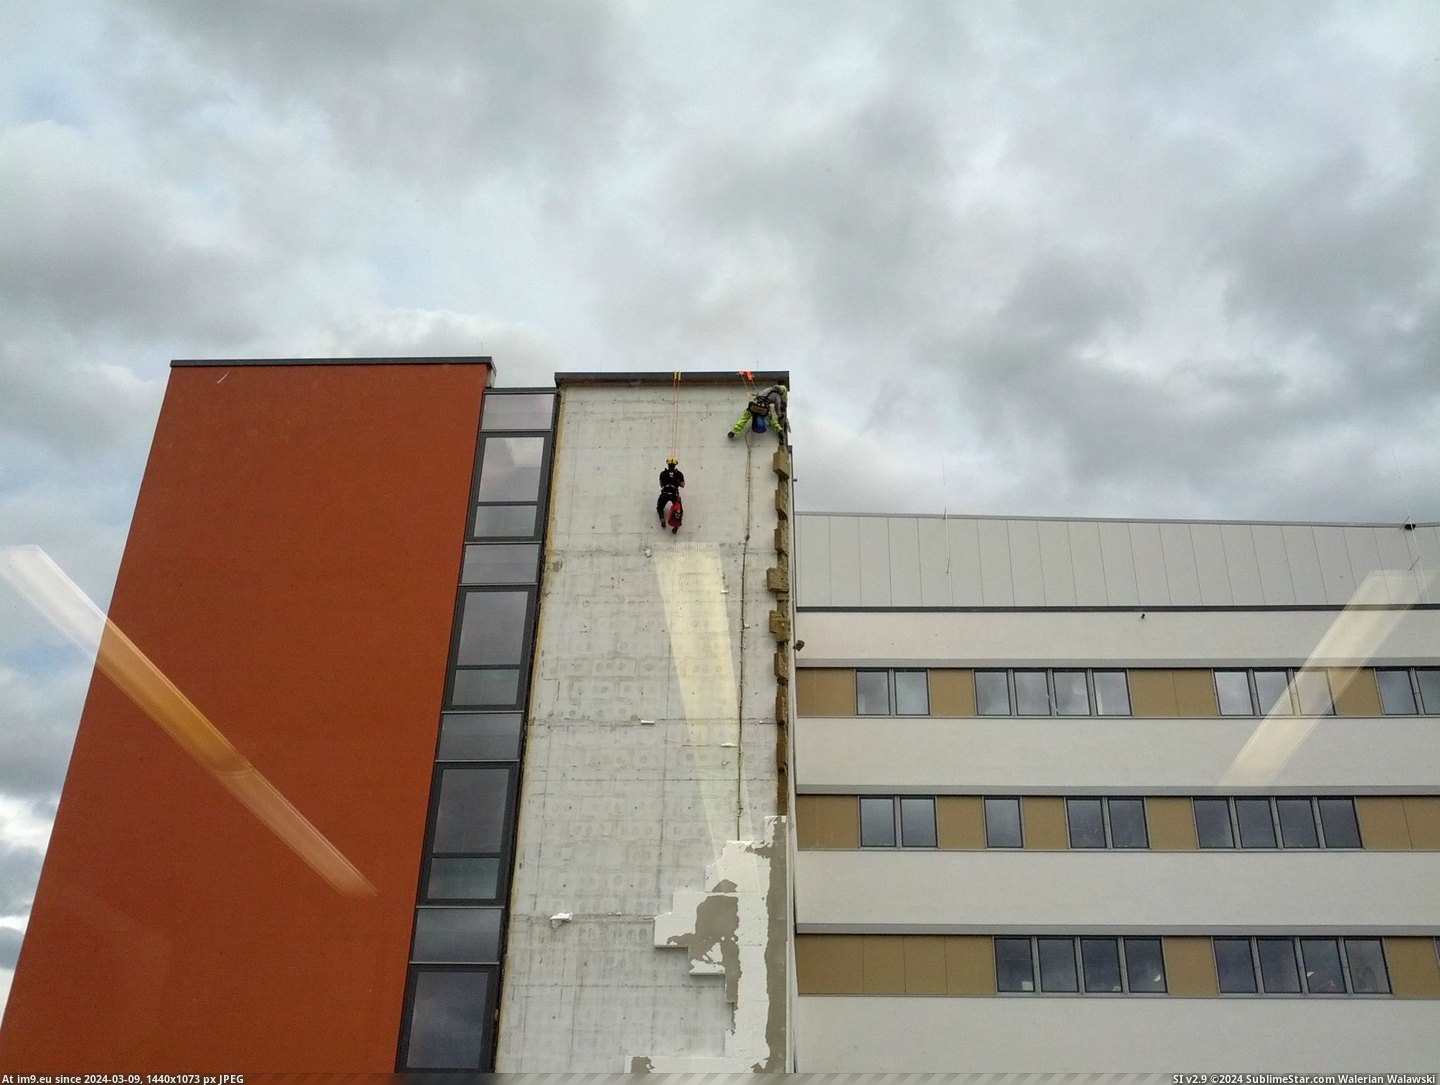 #Was #Off #Building #Fell #Lab #Wall #Sitting [Pics] Was sitting in the lab when the wall of the next building fell off. 5 Pic. (Bild von album My r/PICS favs))